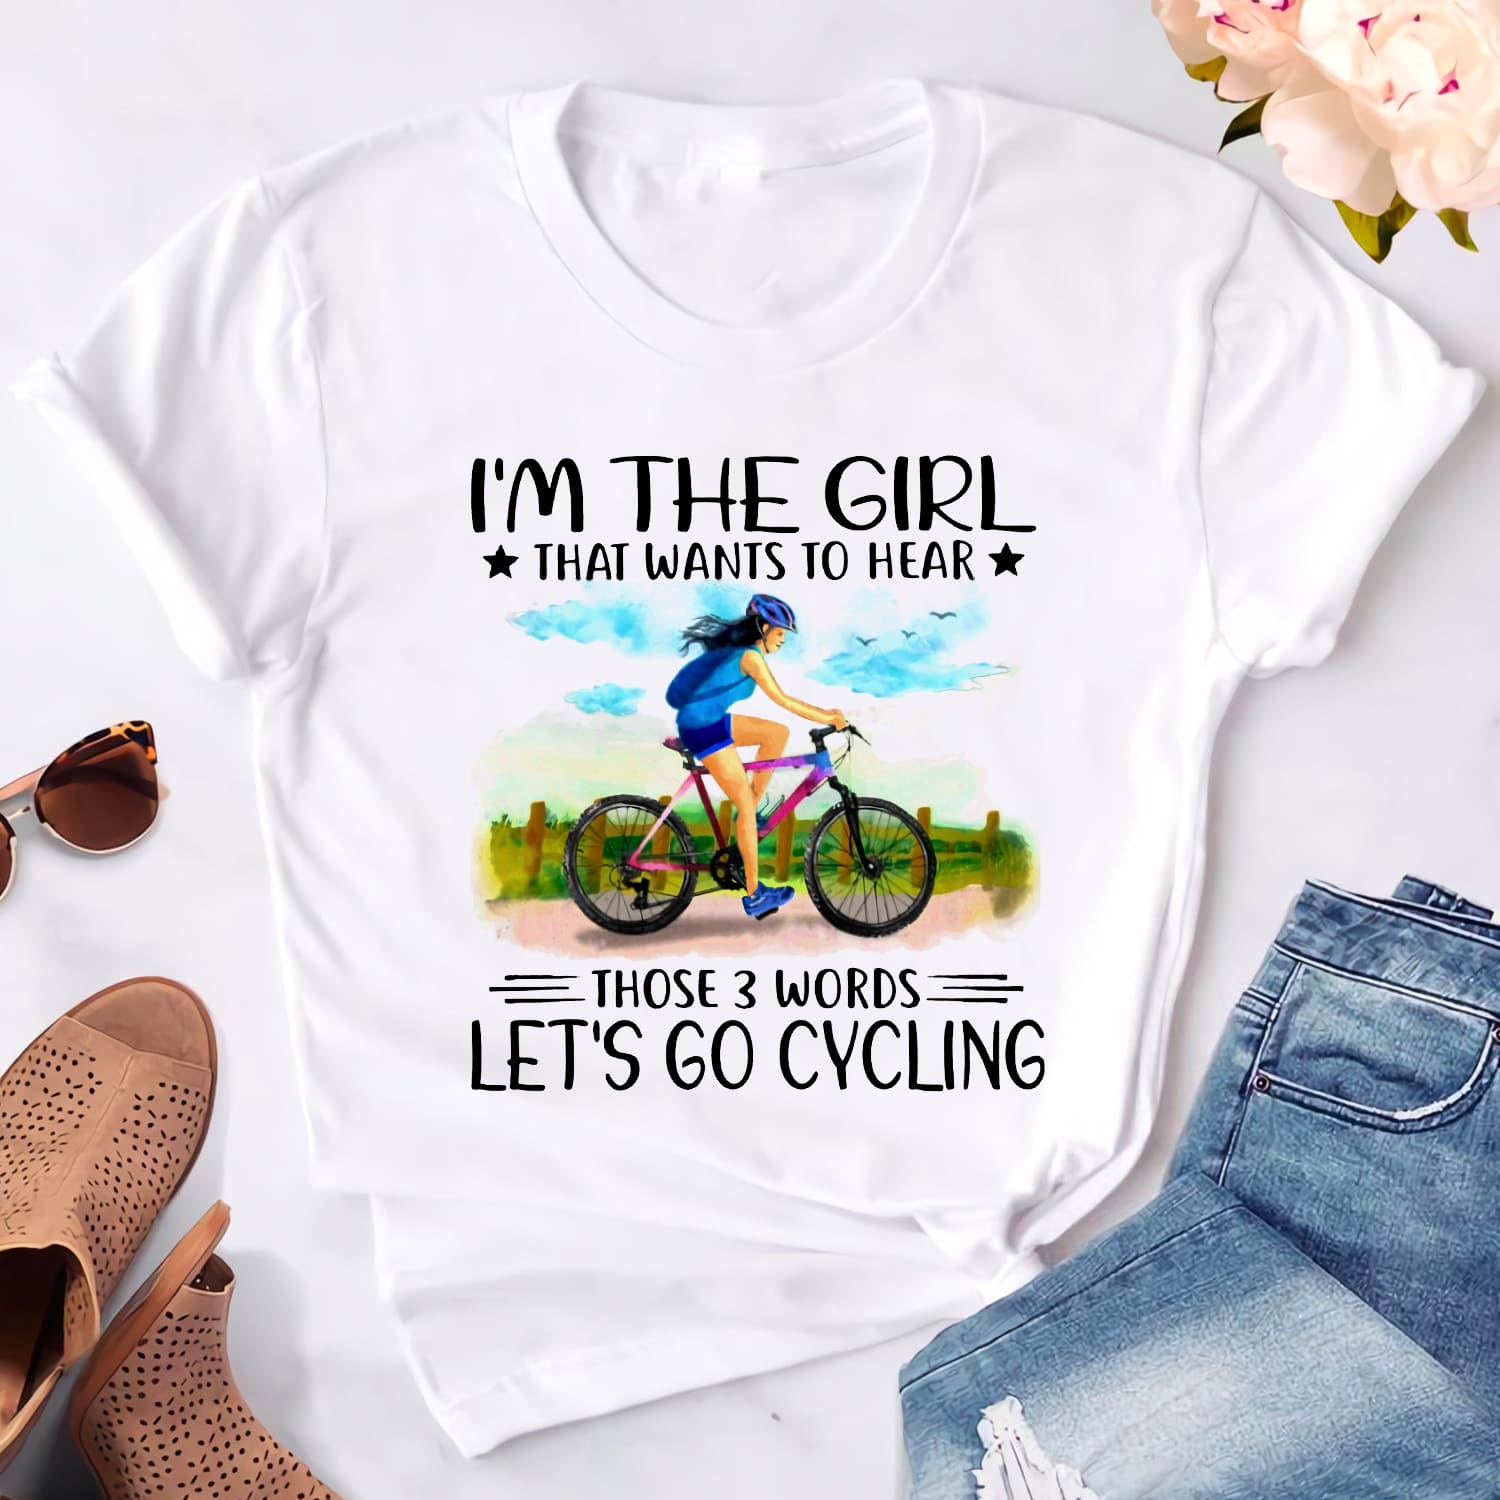 I'm the girl that wants to hear those 3 words Let's go cycling - Girl riding bicycle, healthy lifestyle